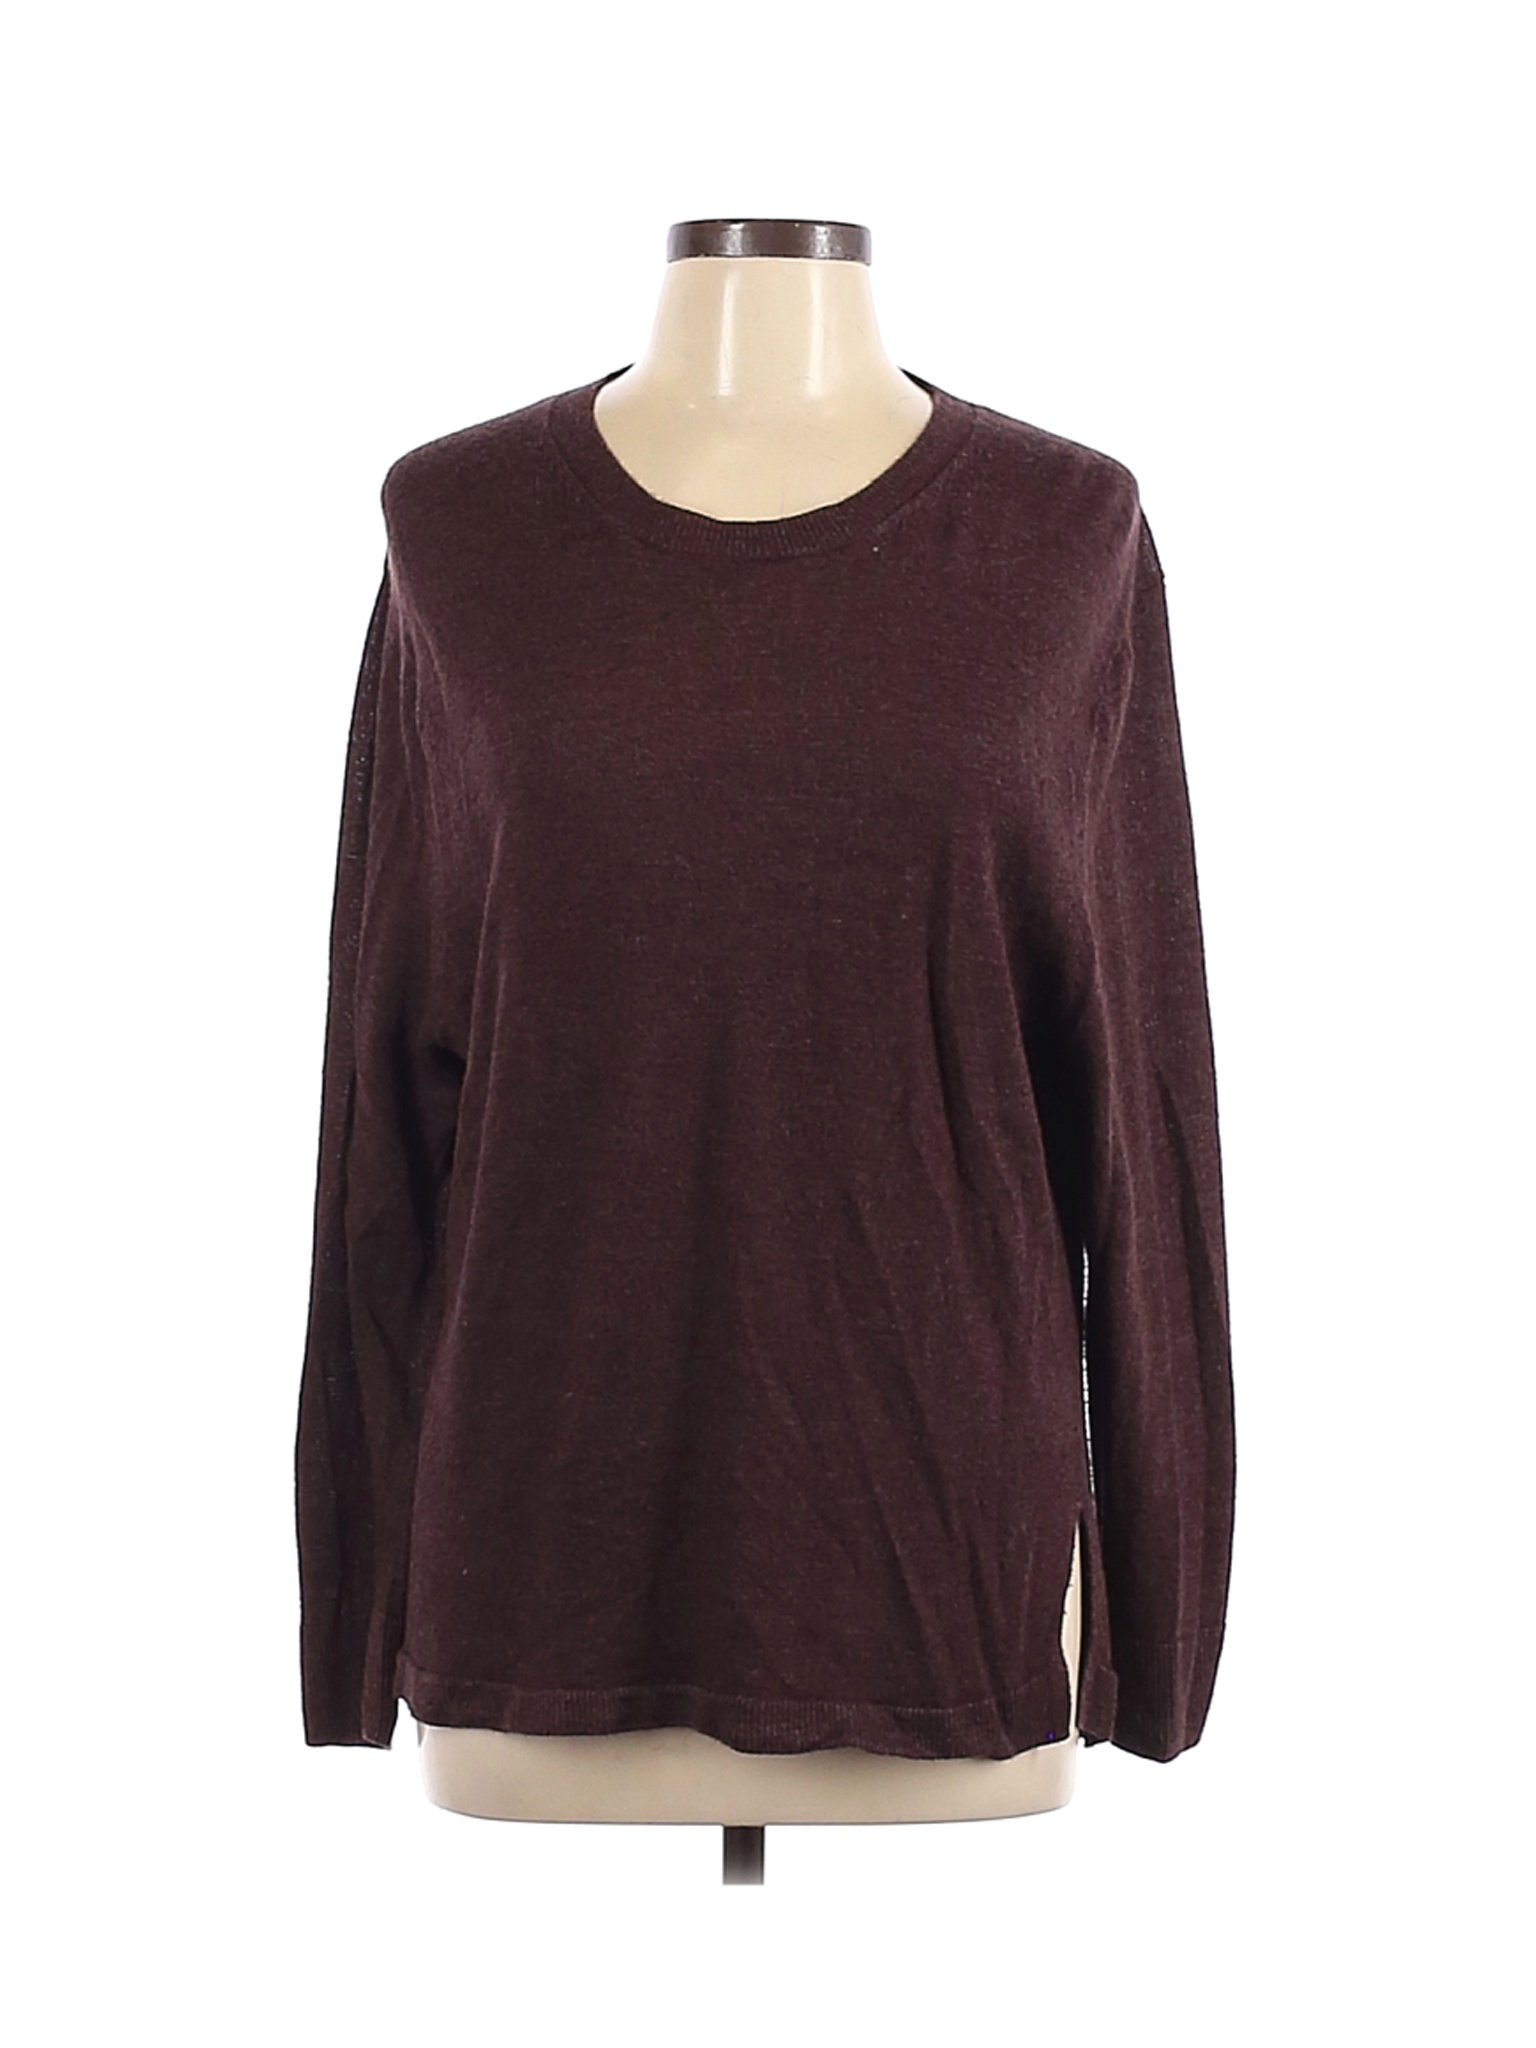 MICHAEL Michael Kors Solid Brown Pullover Sweater Size L - 60% off ...